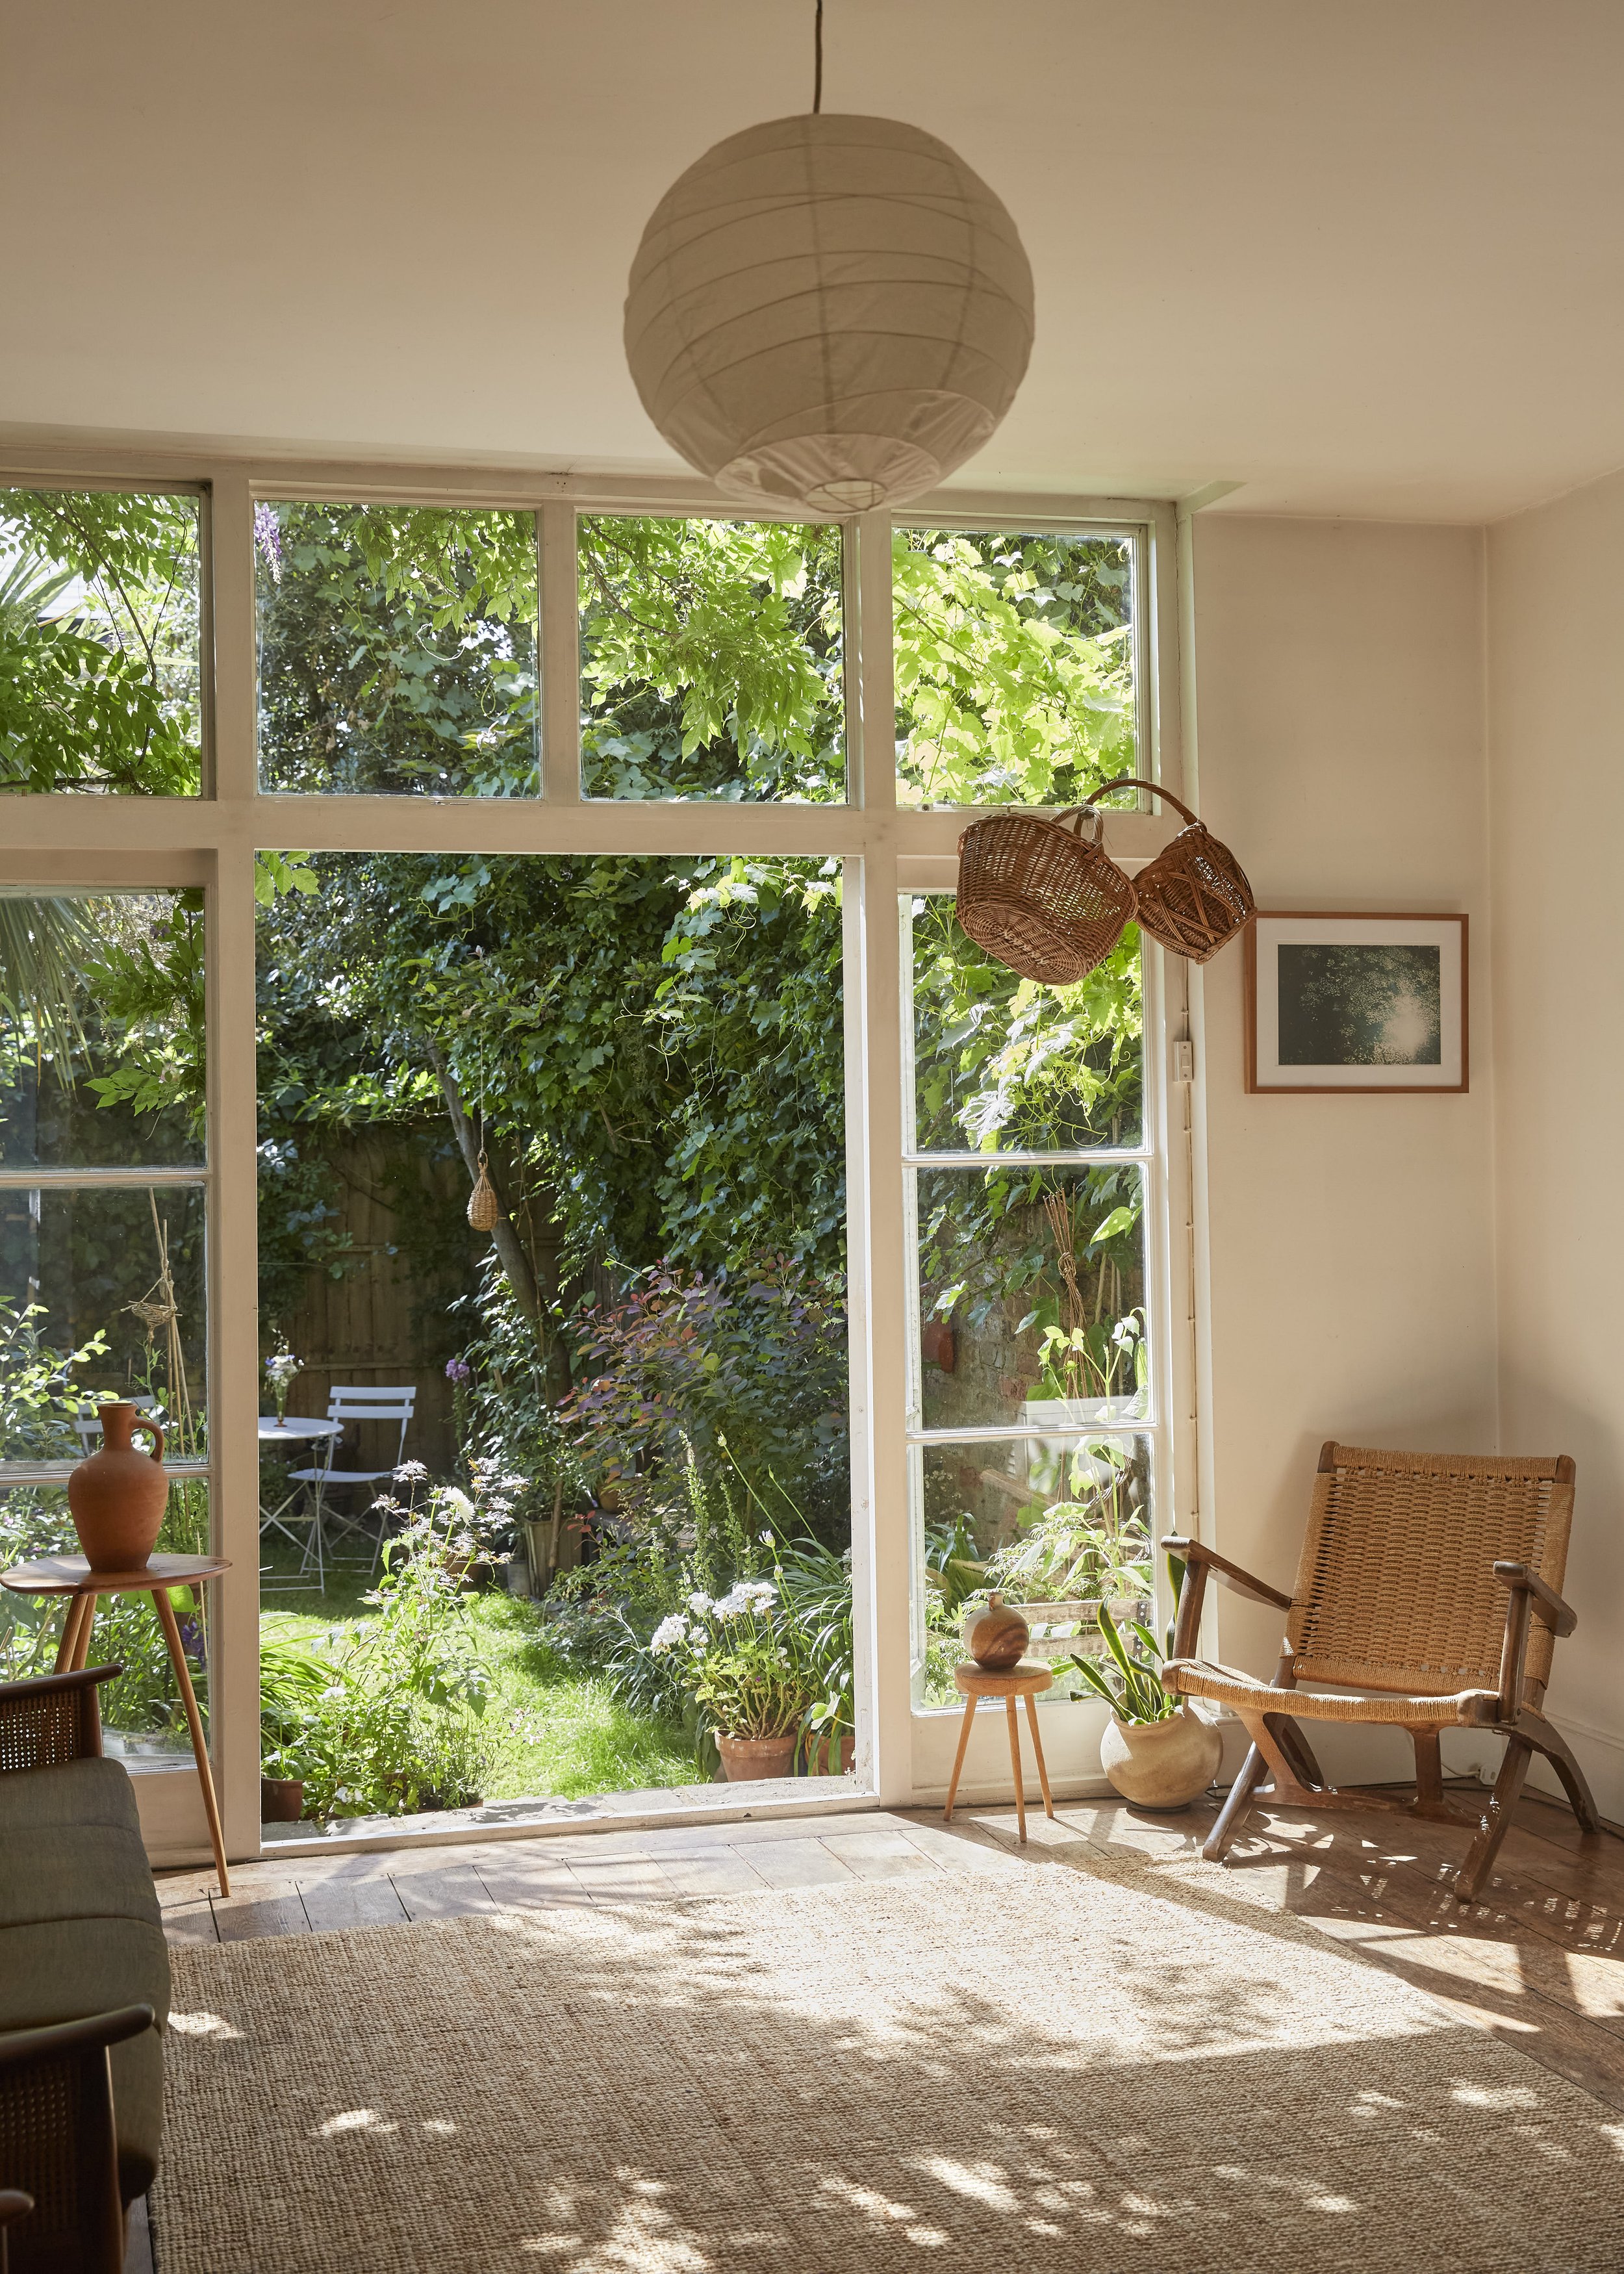 Sun filled room with view into garden, decorated with vintage and handmade items